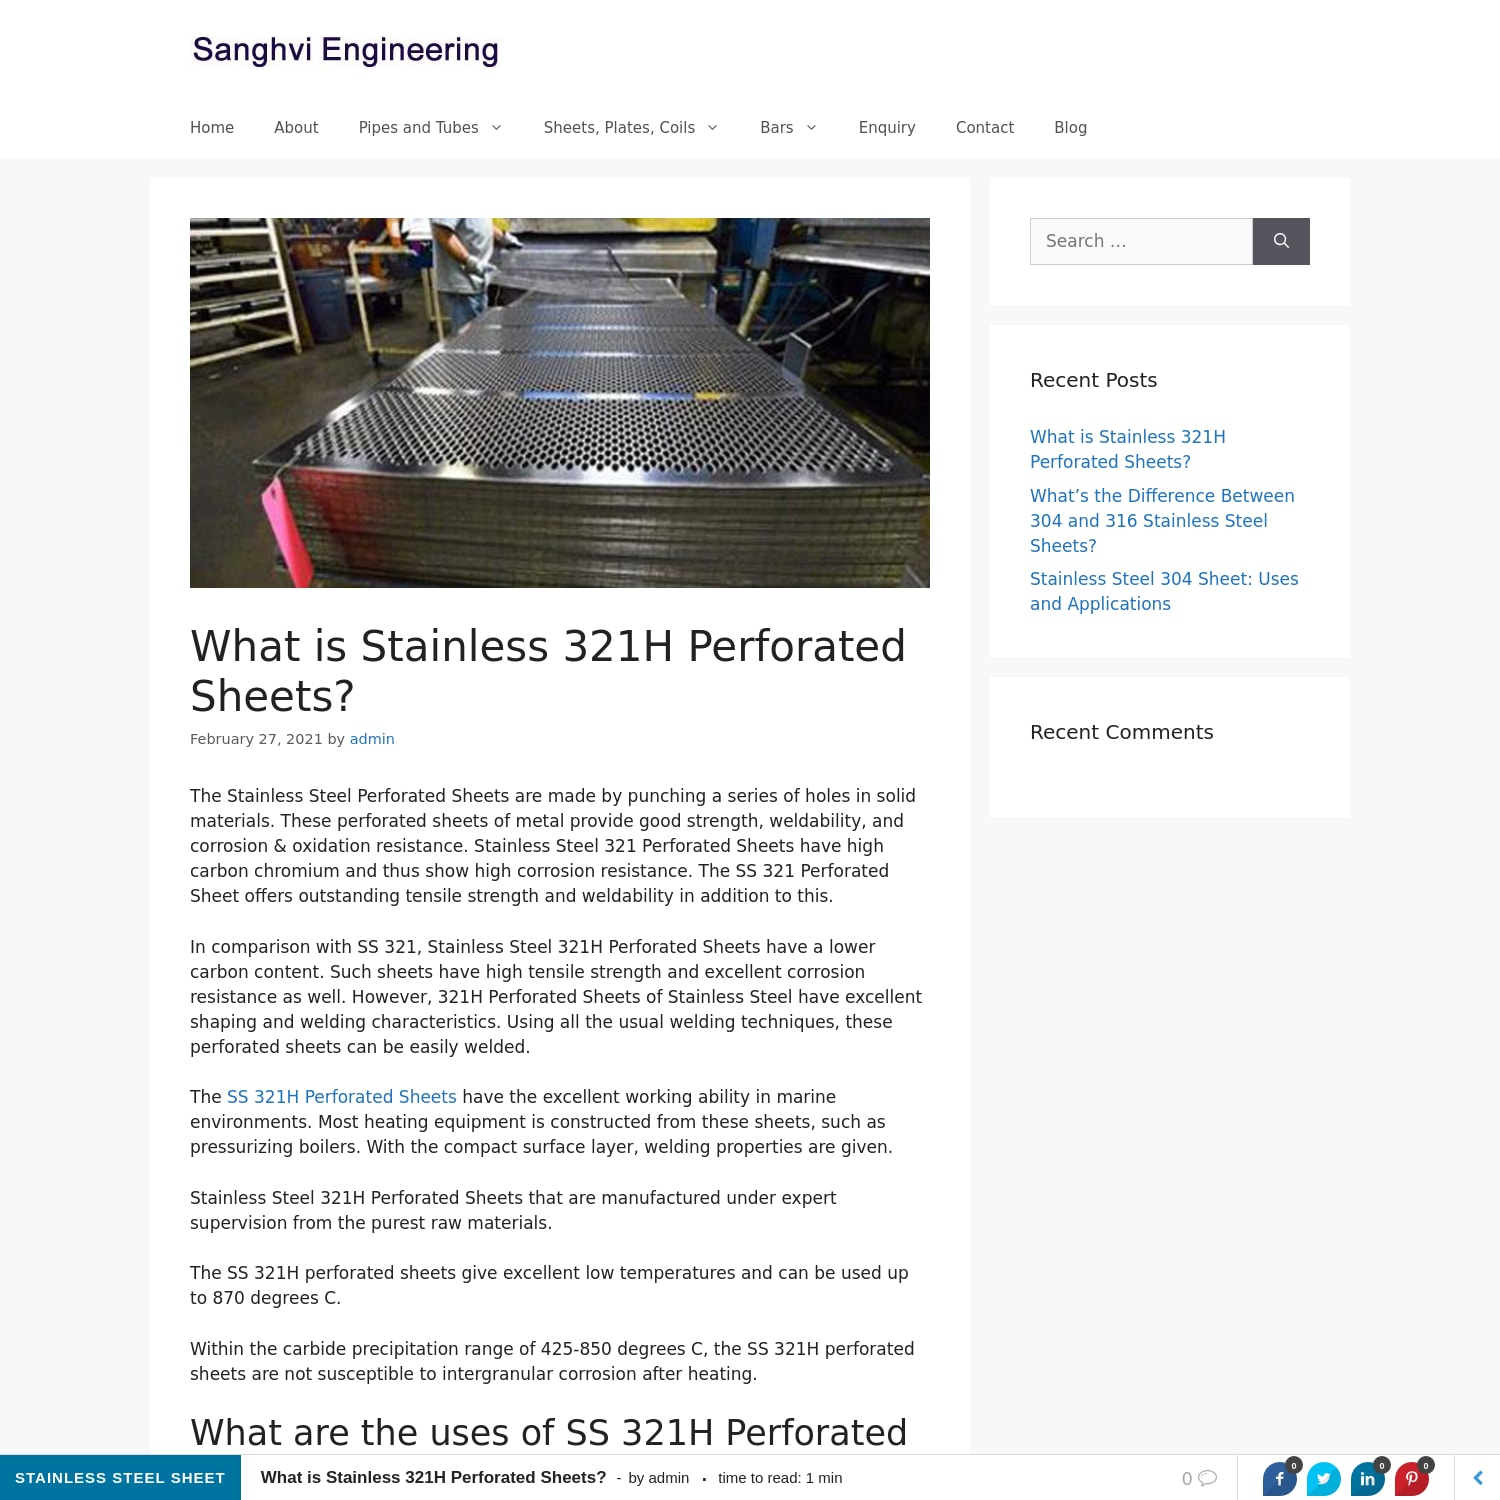 What is Stainless 321H Perforated Sheets? - Sanghvi Engineerings Blog